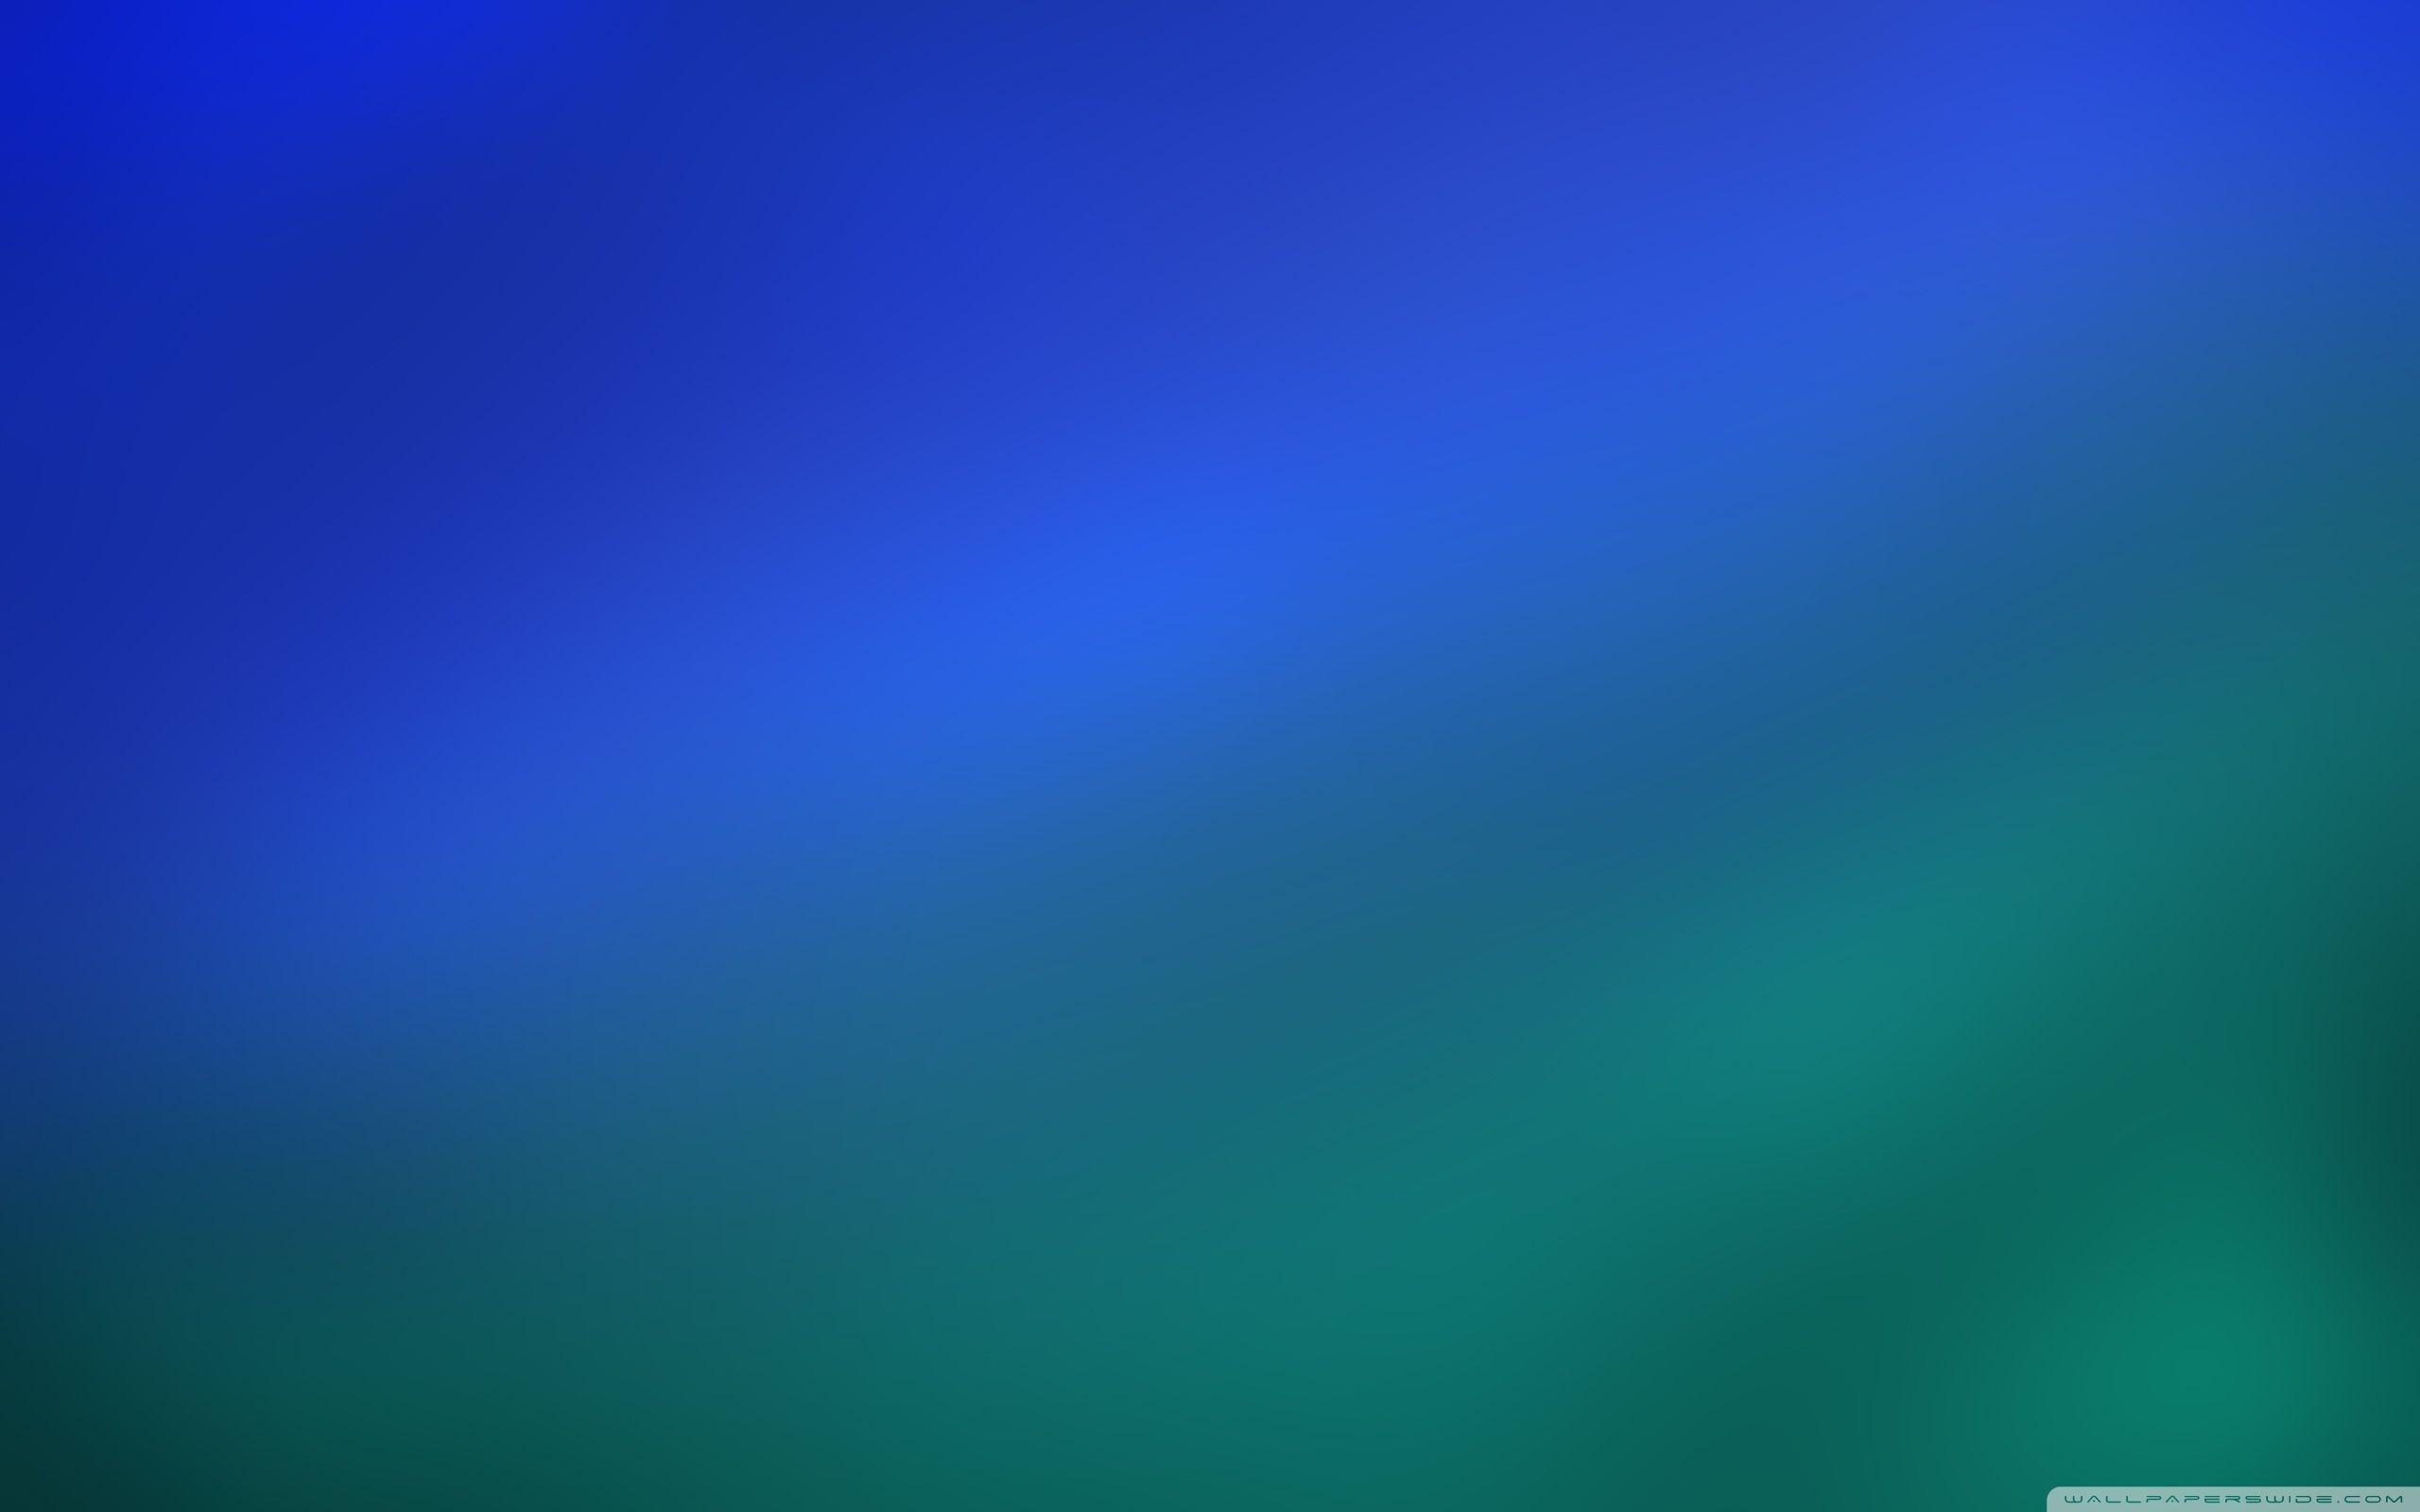 Dark Blue And Green Wallpapers